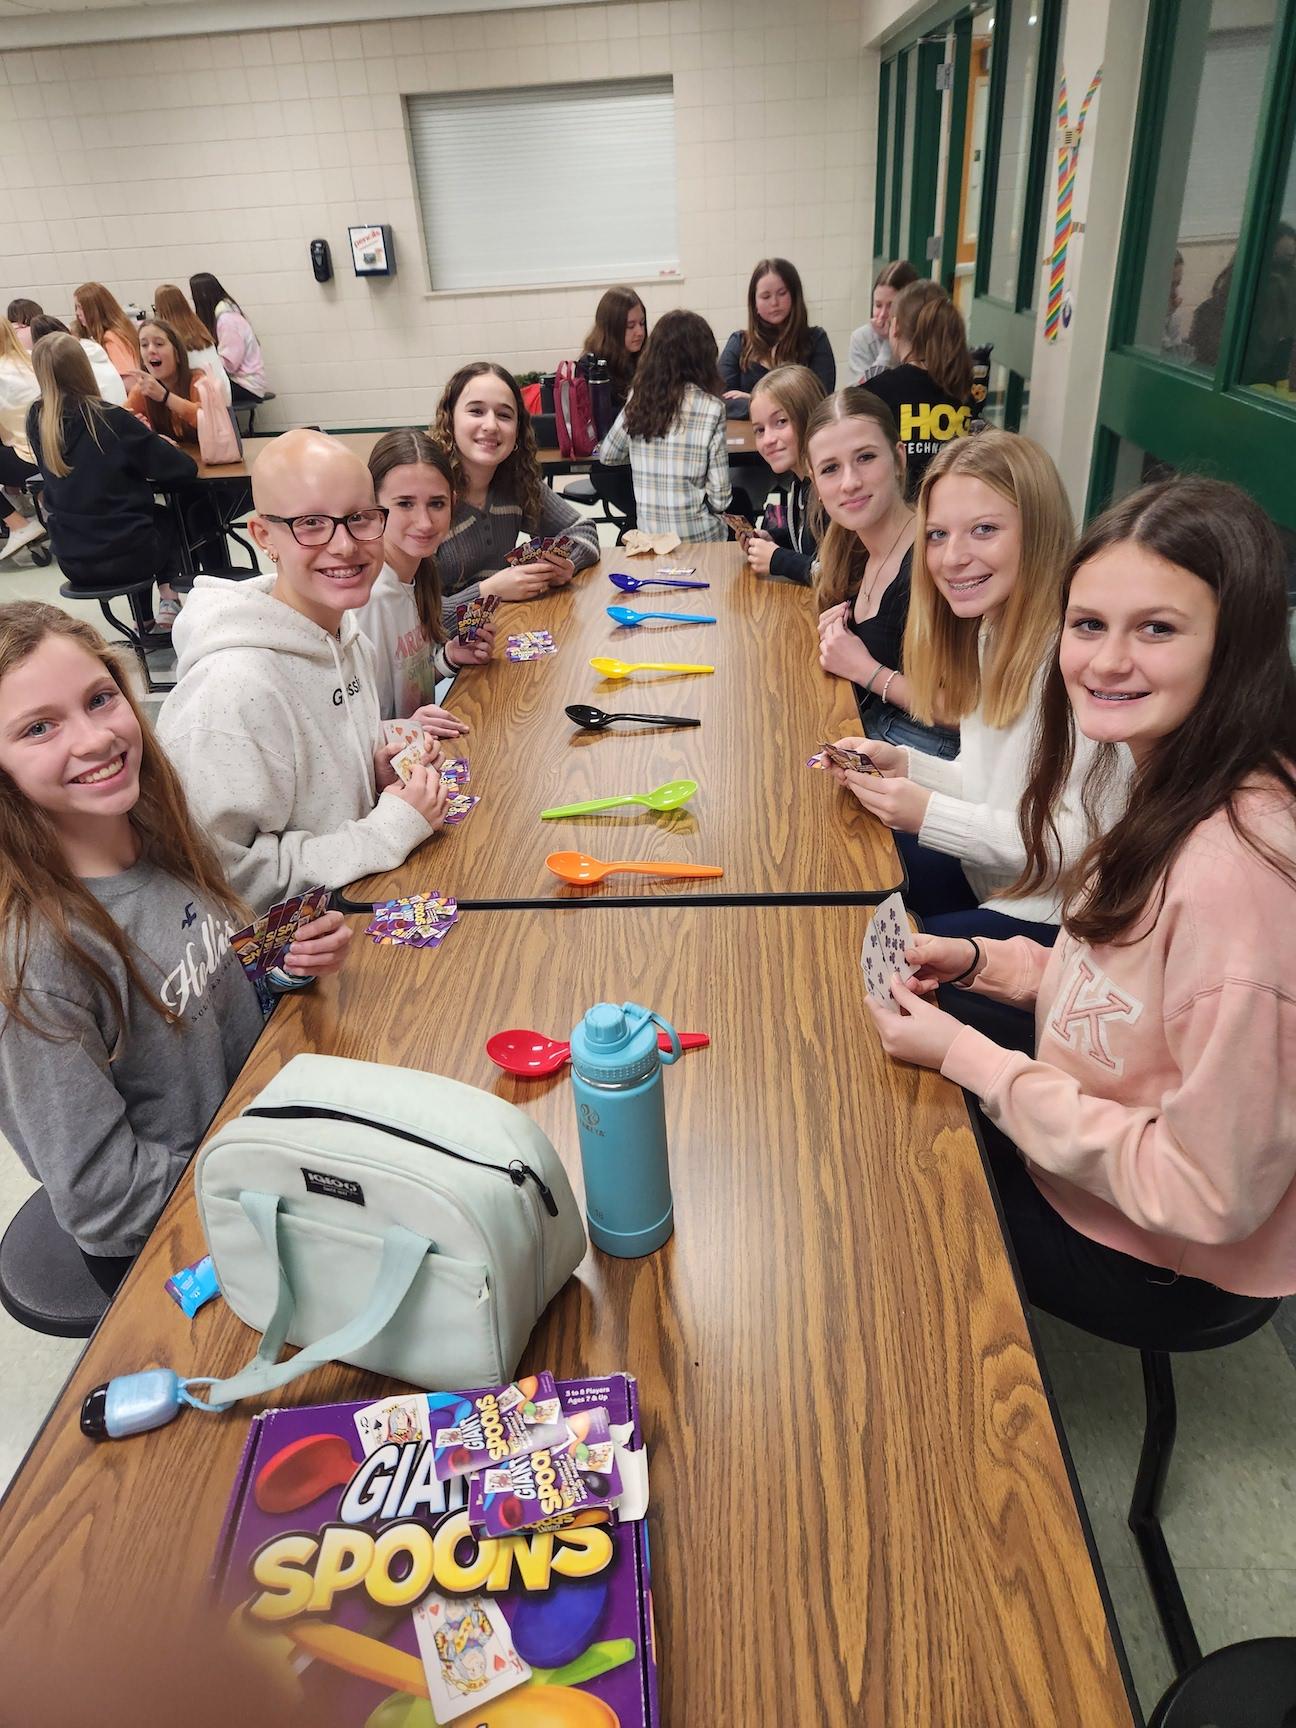 8th-graders enjoy a game of Giant Spoons